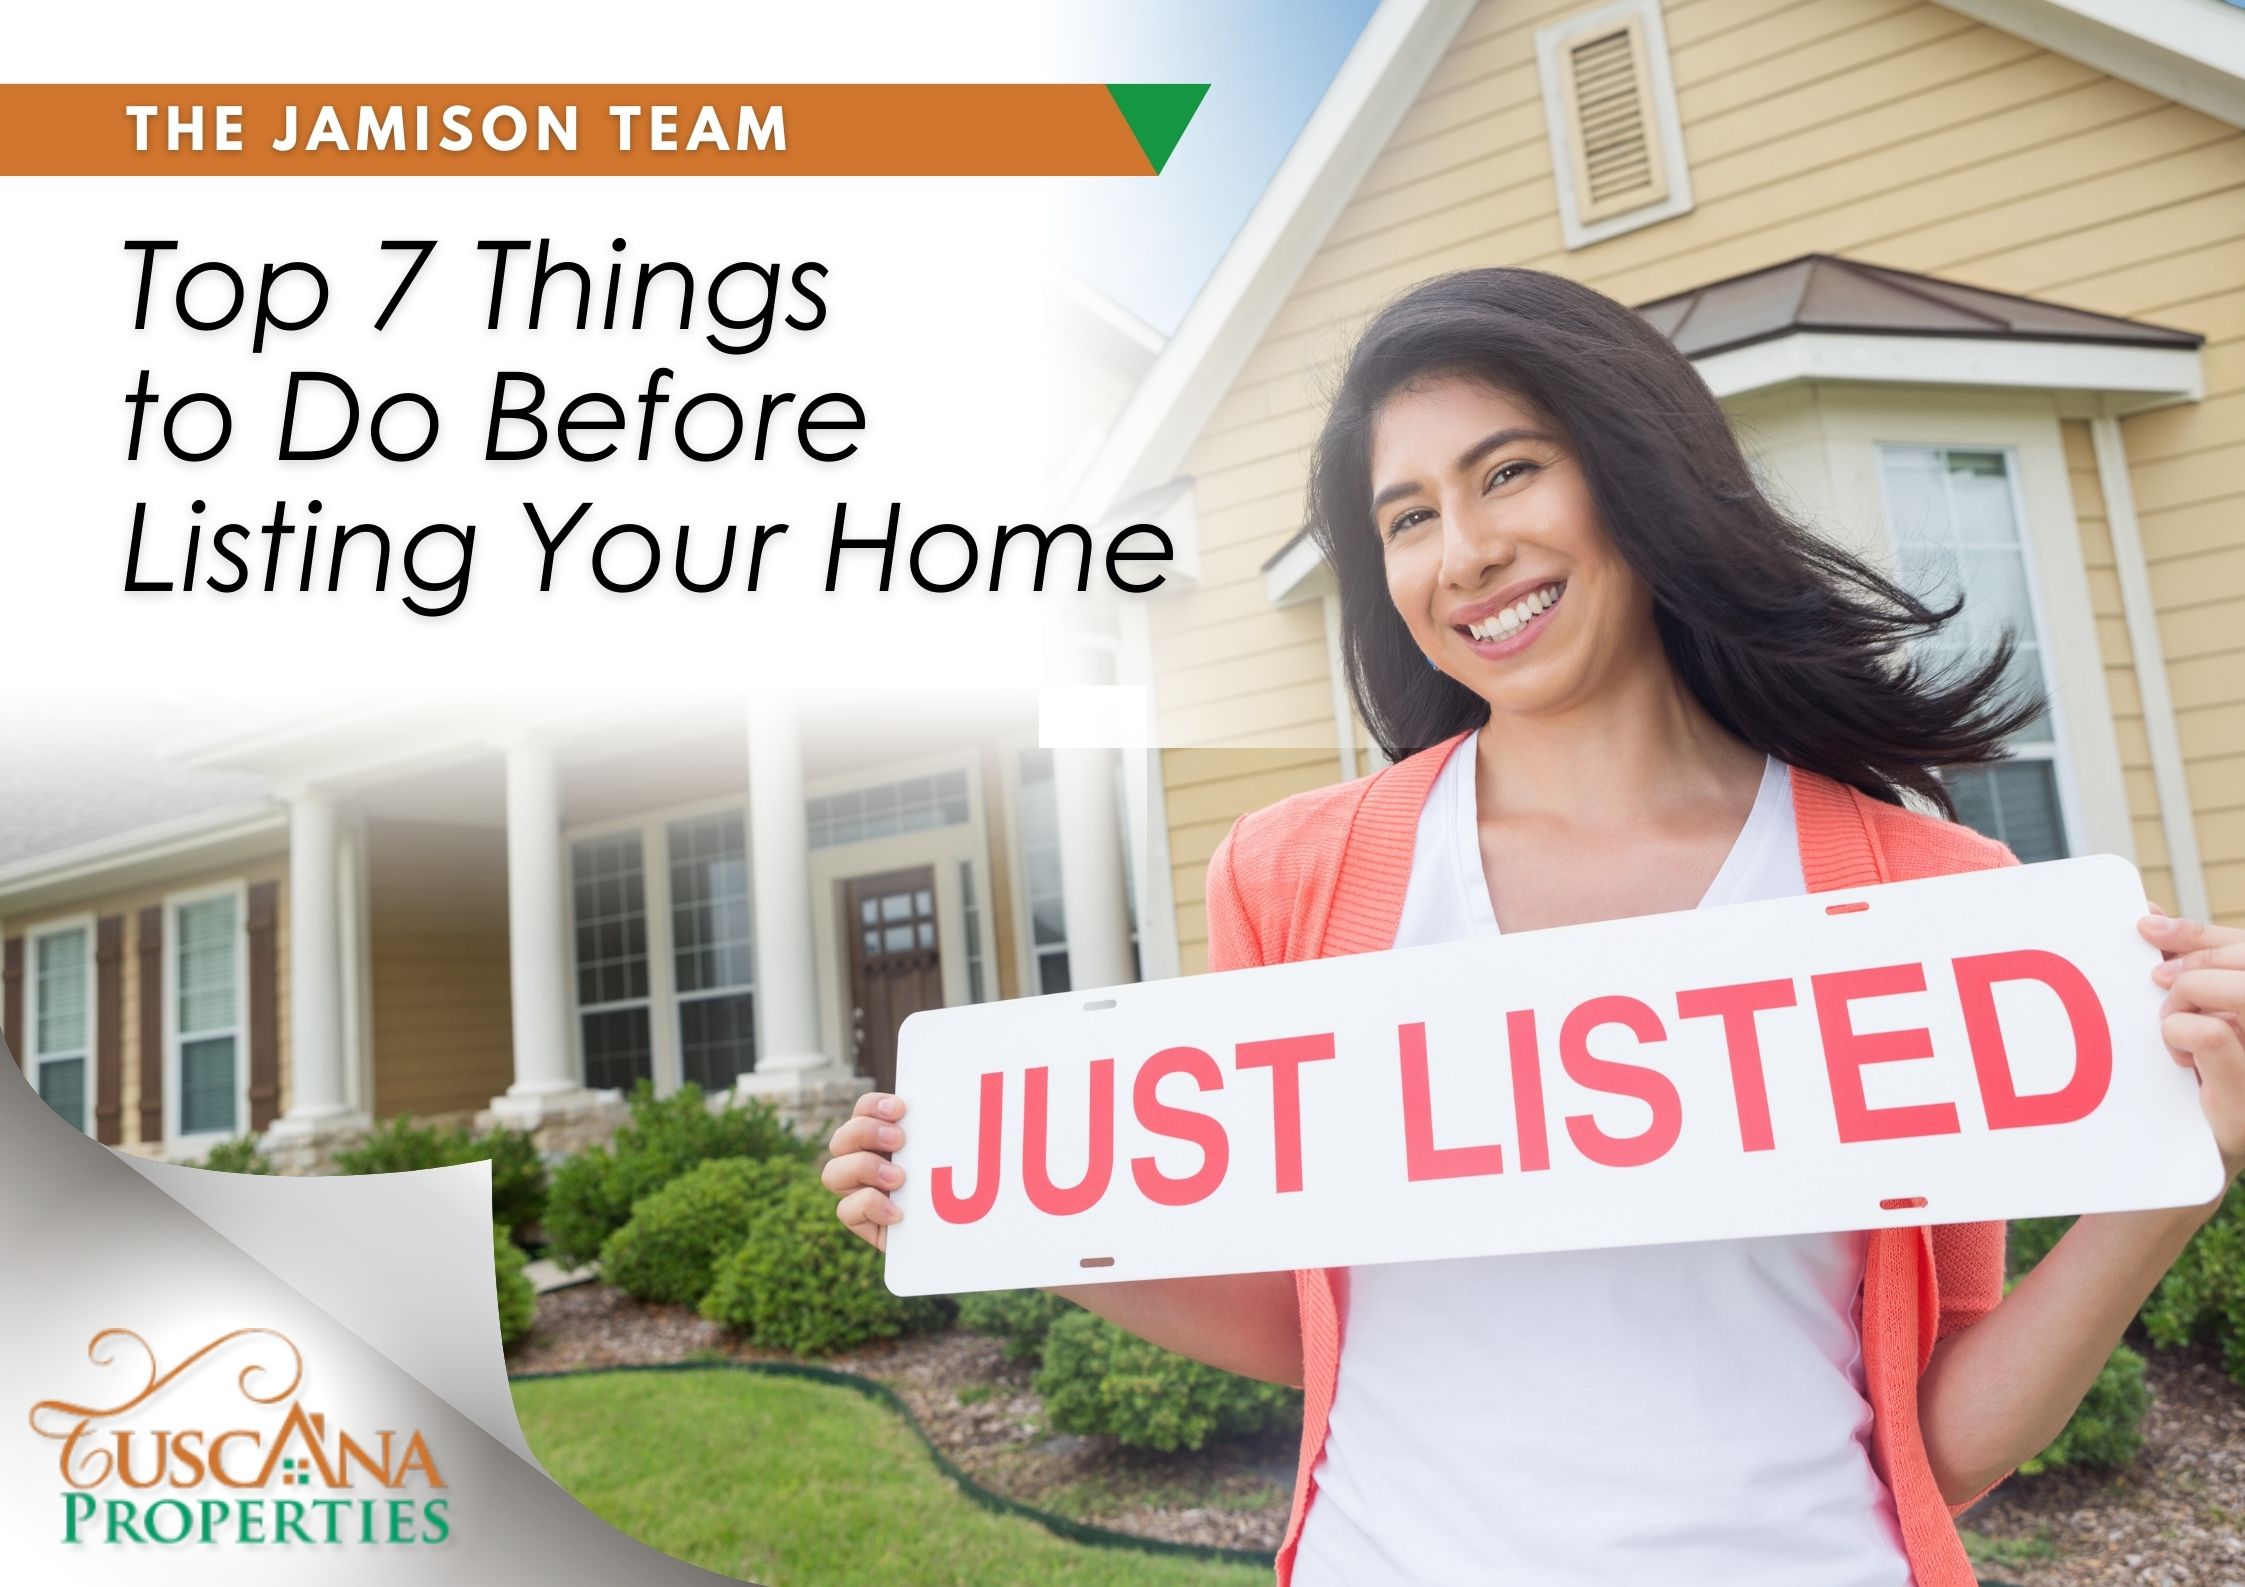 Top 7 Things to do before listing your home